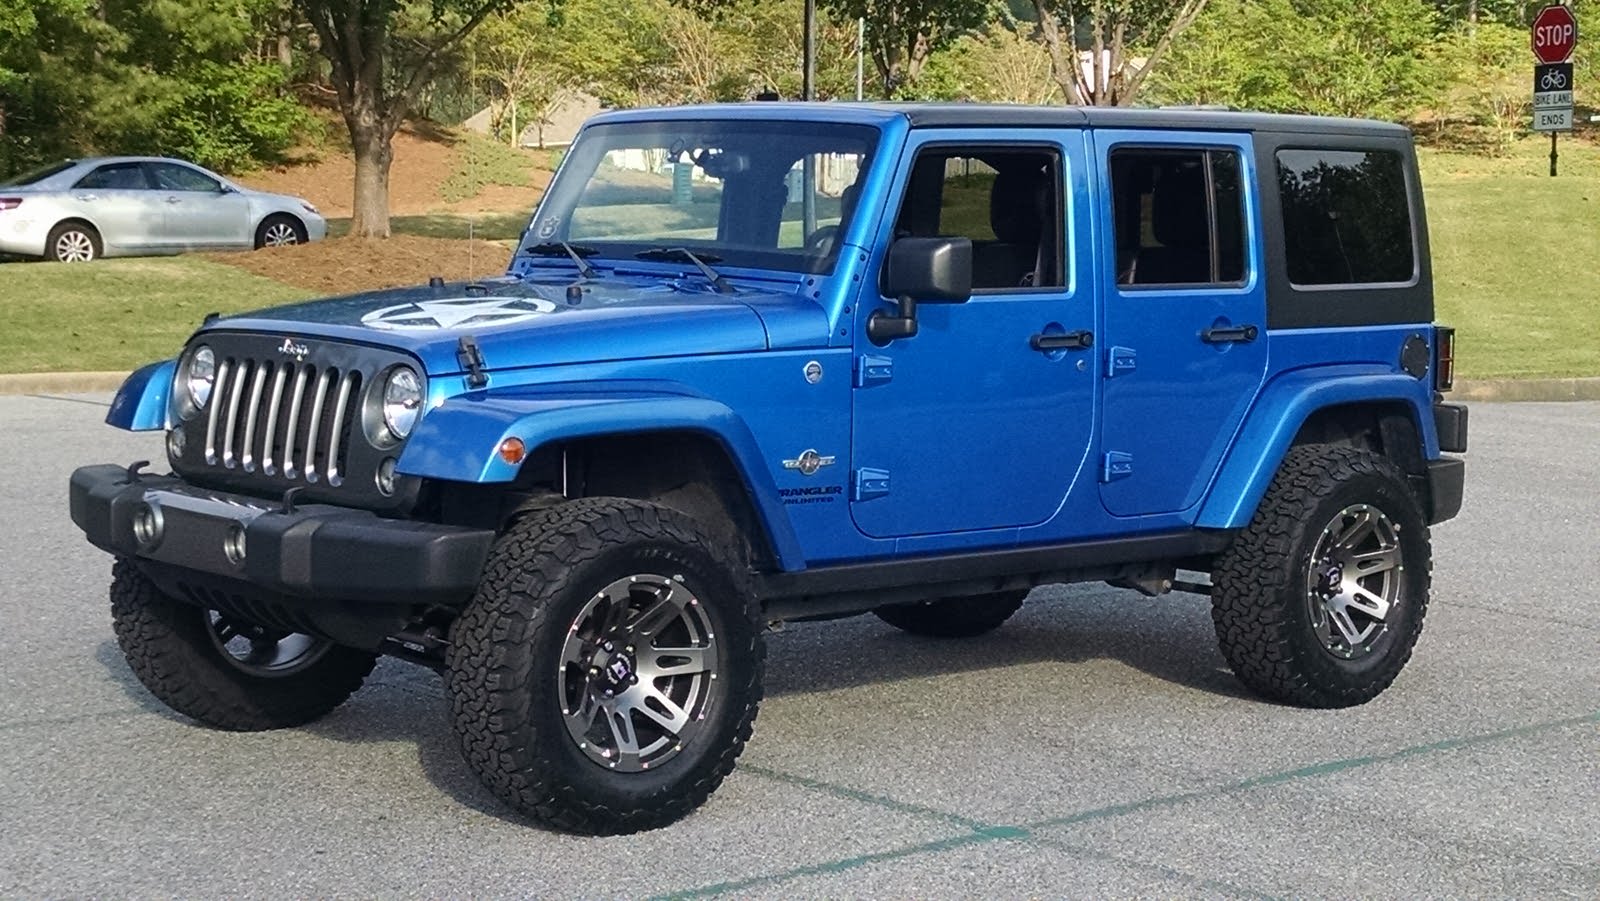 Jeep Wrangler Questions - Pricing my vehicle correctly - CarGurus